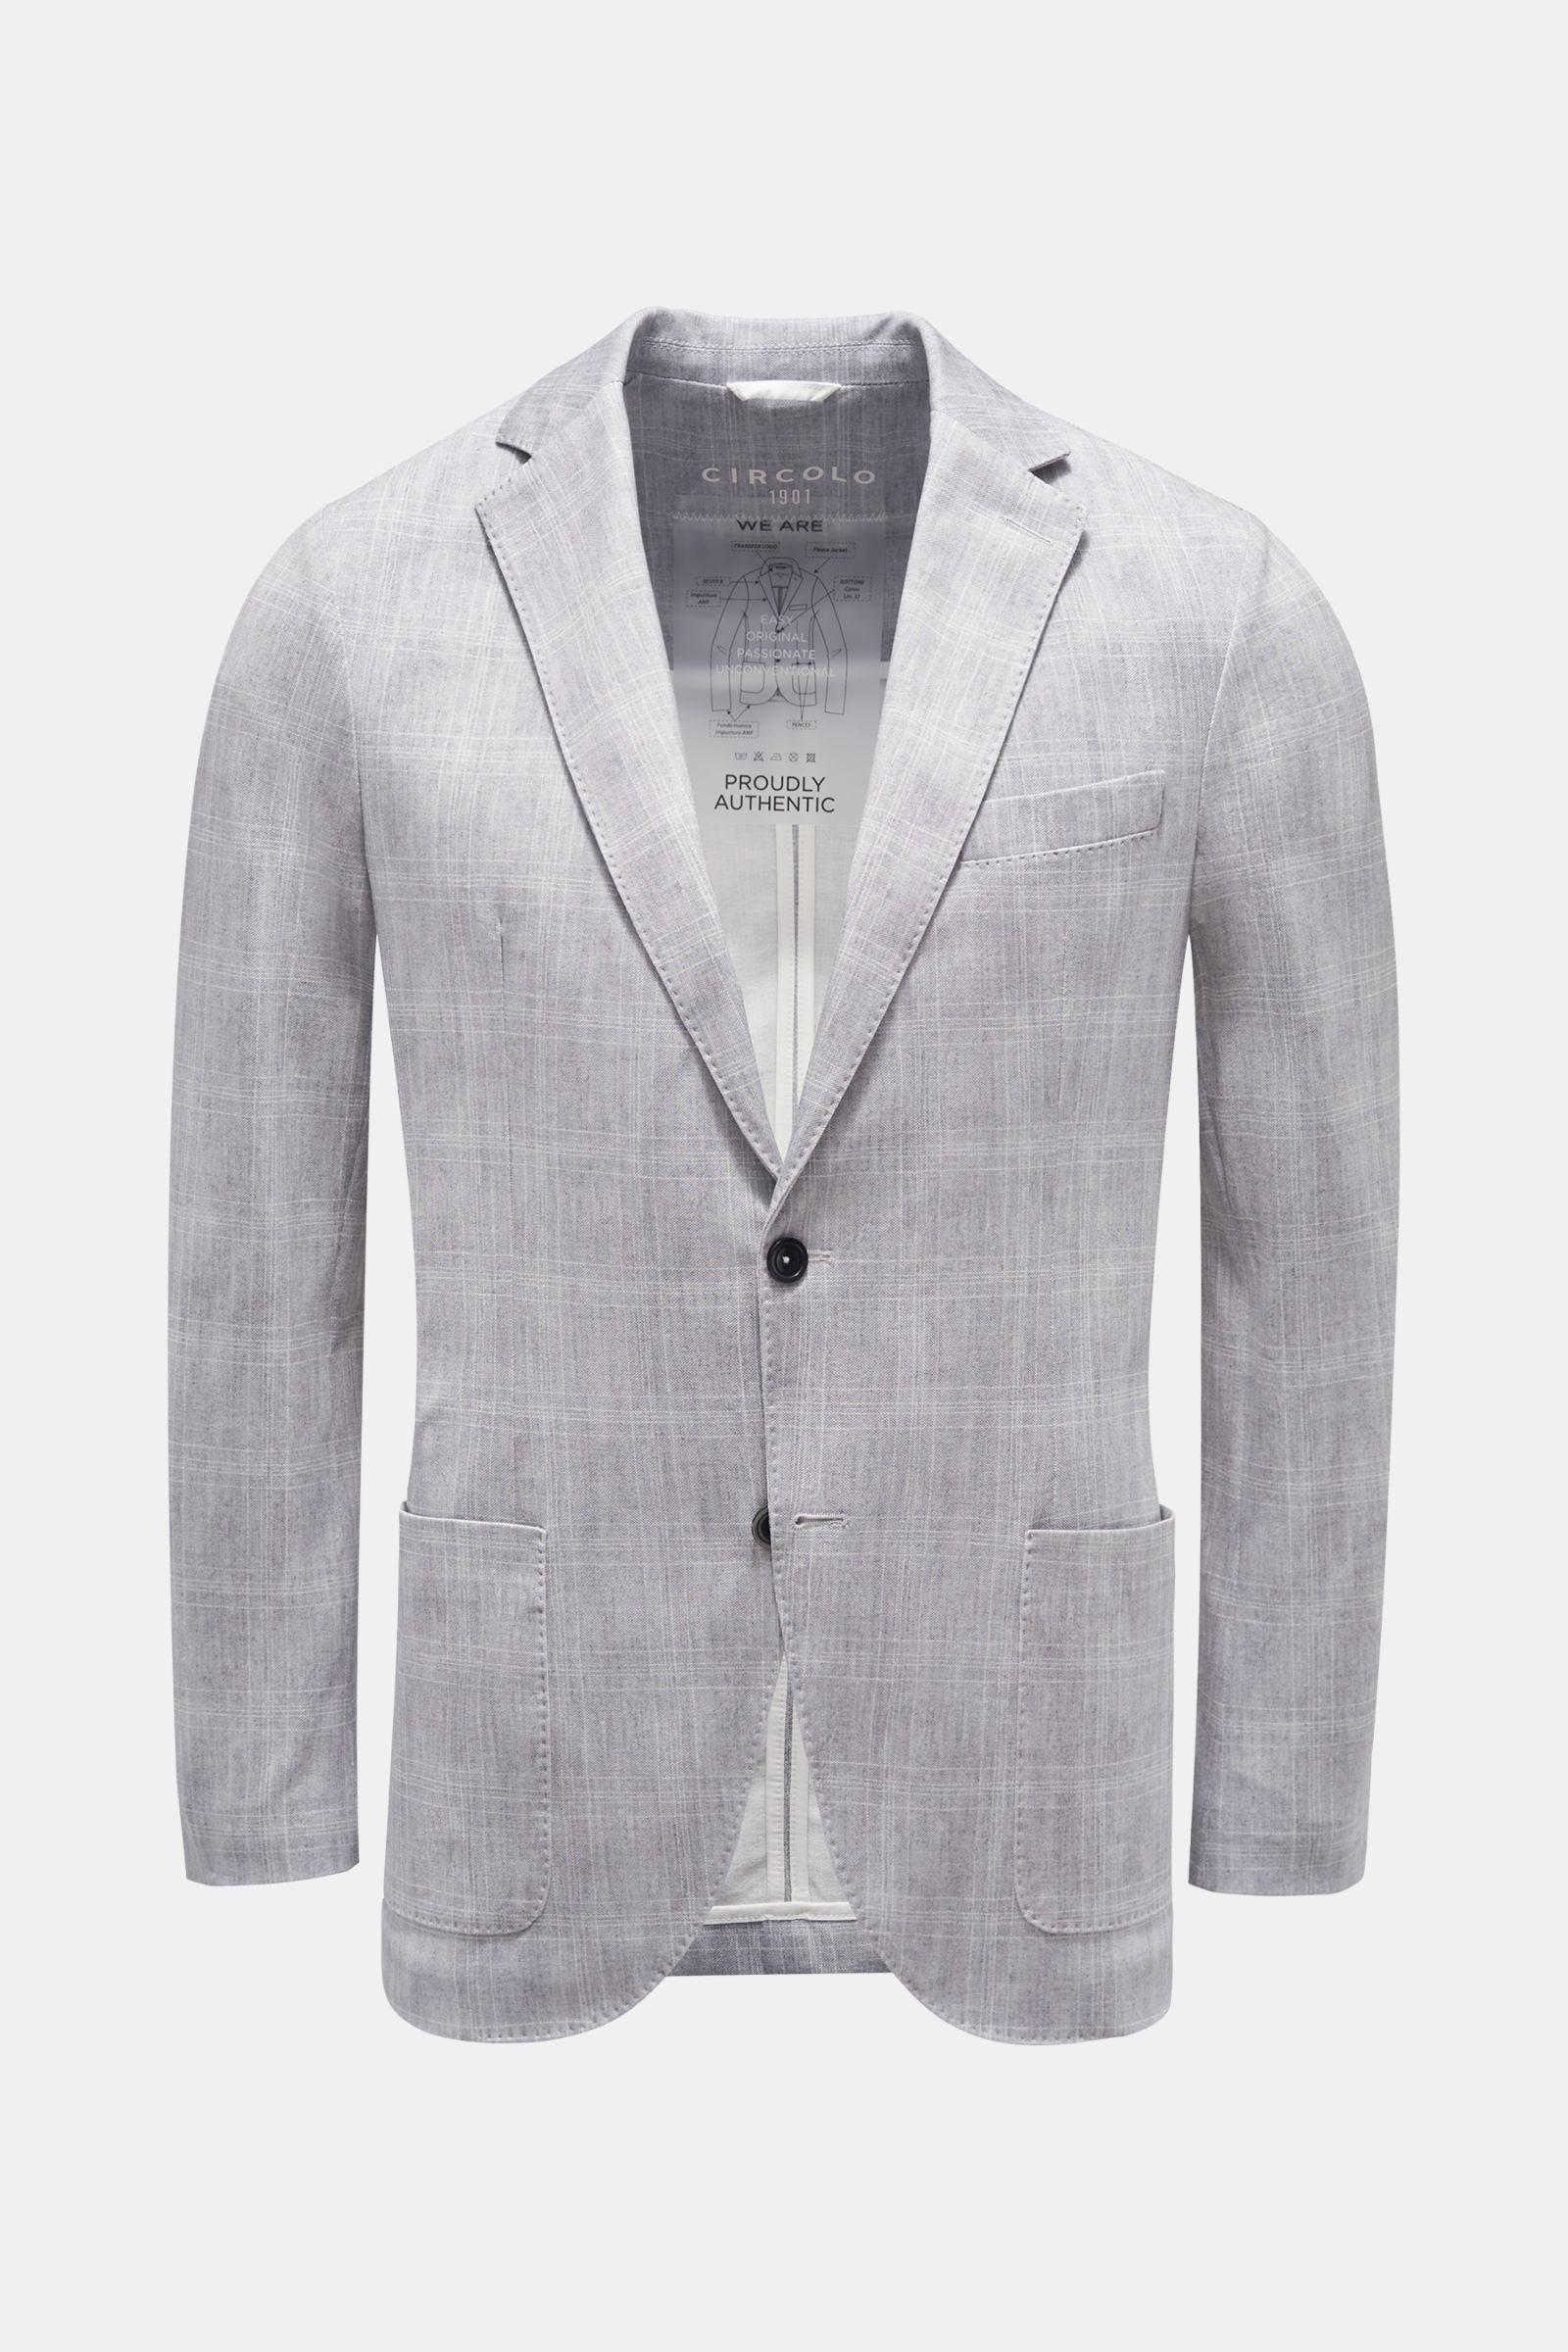 Jersey smart-casual jacket light grey/white checked